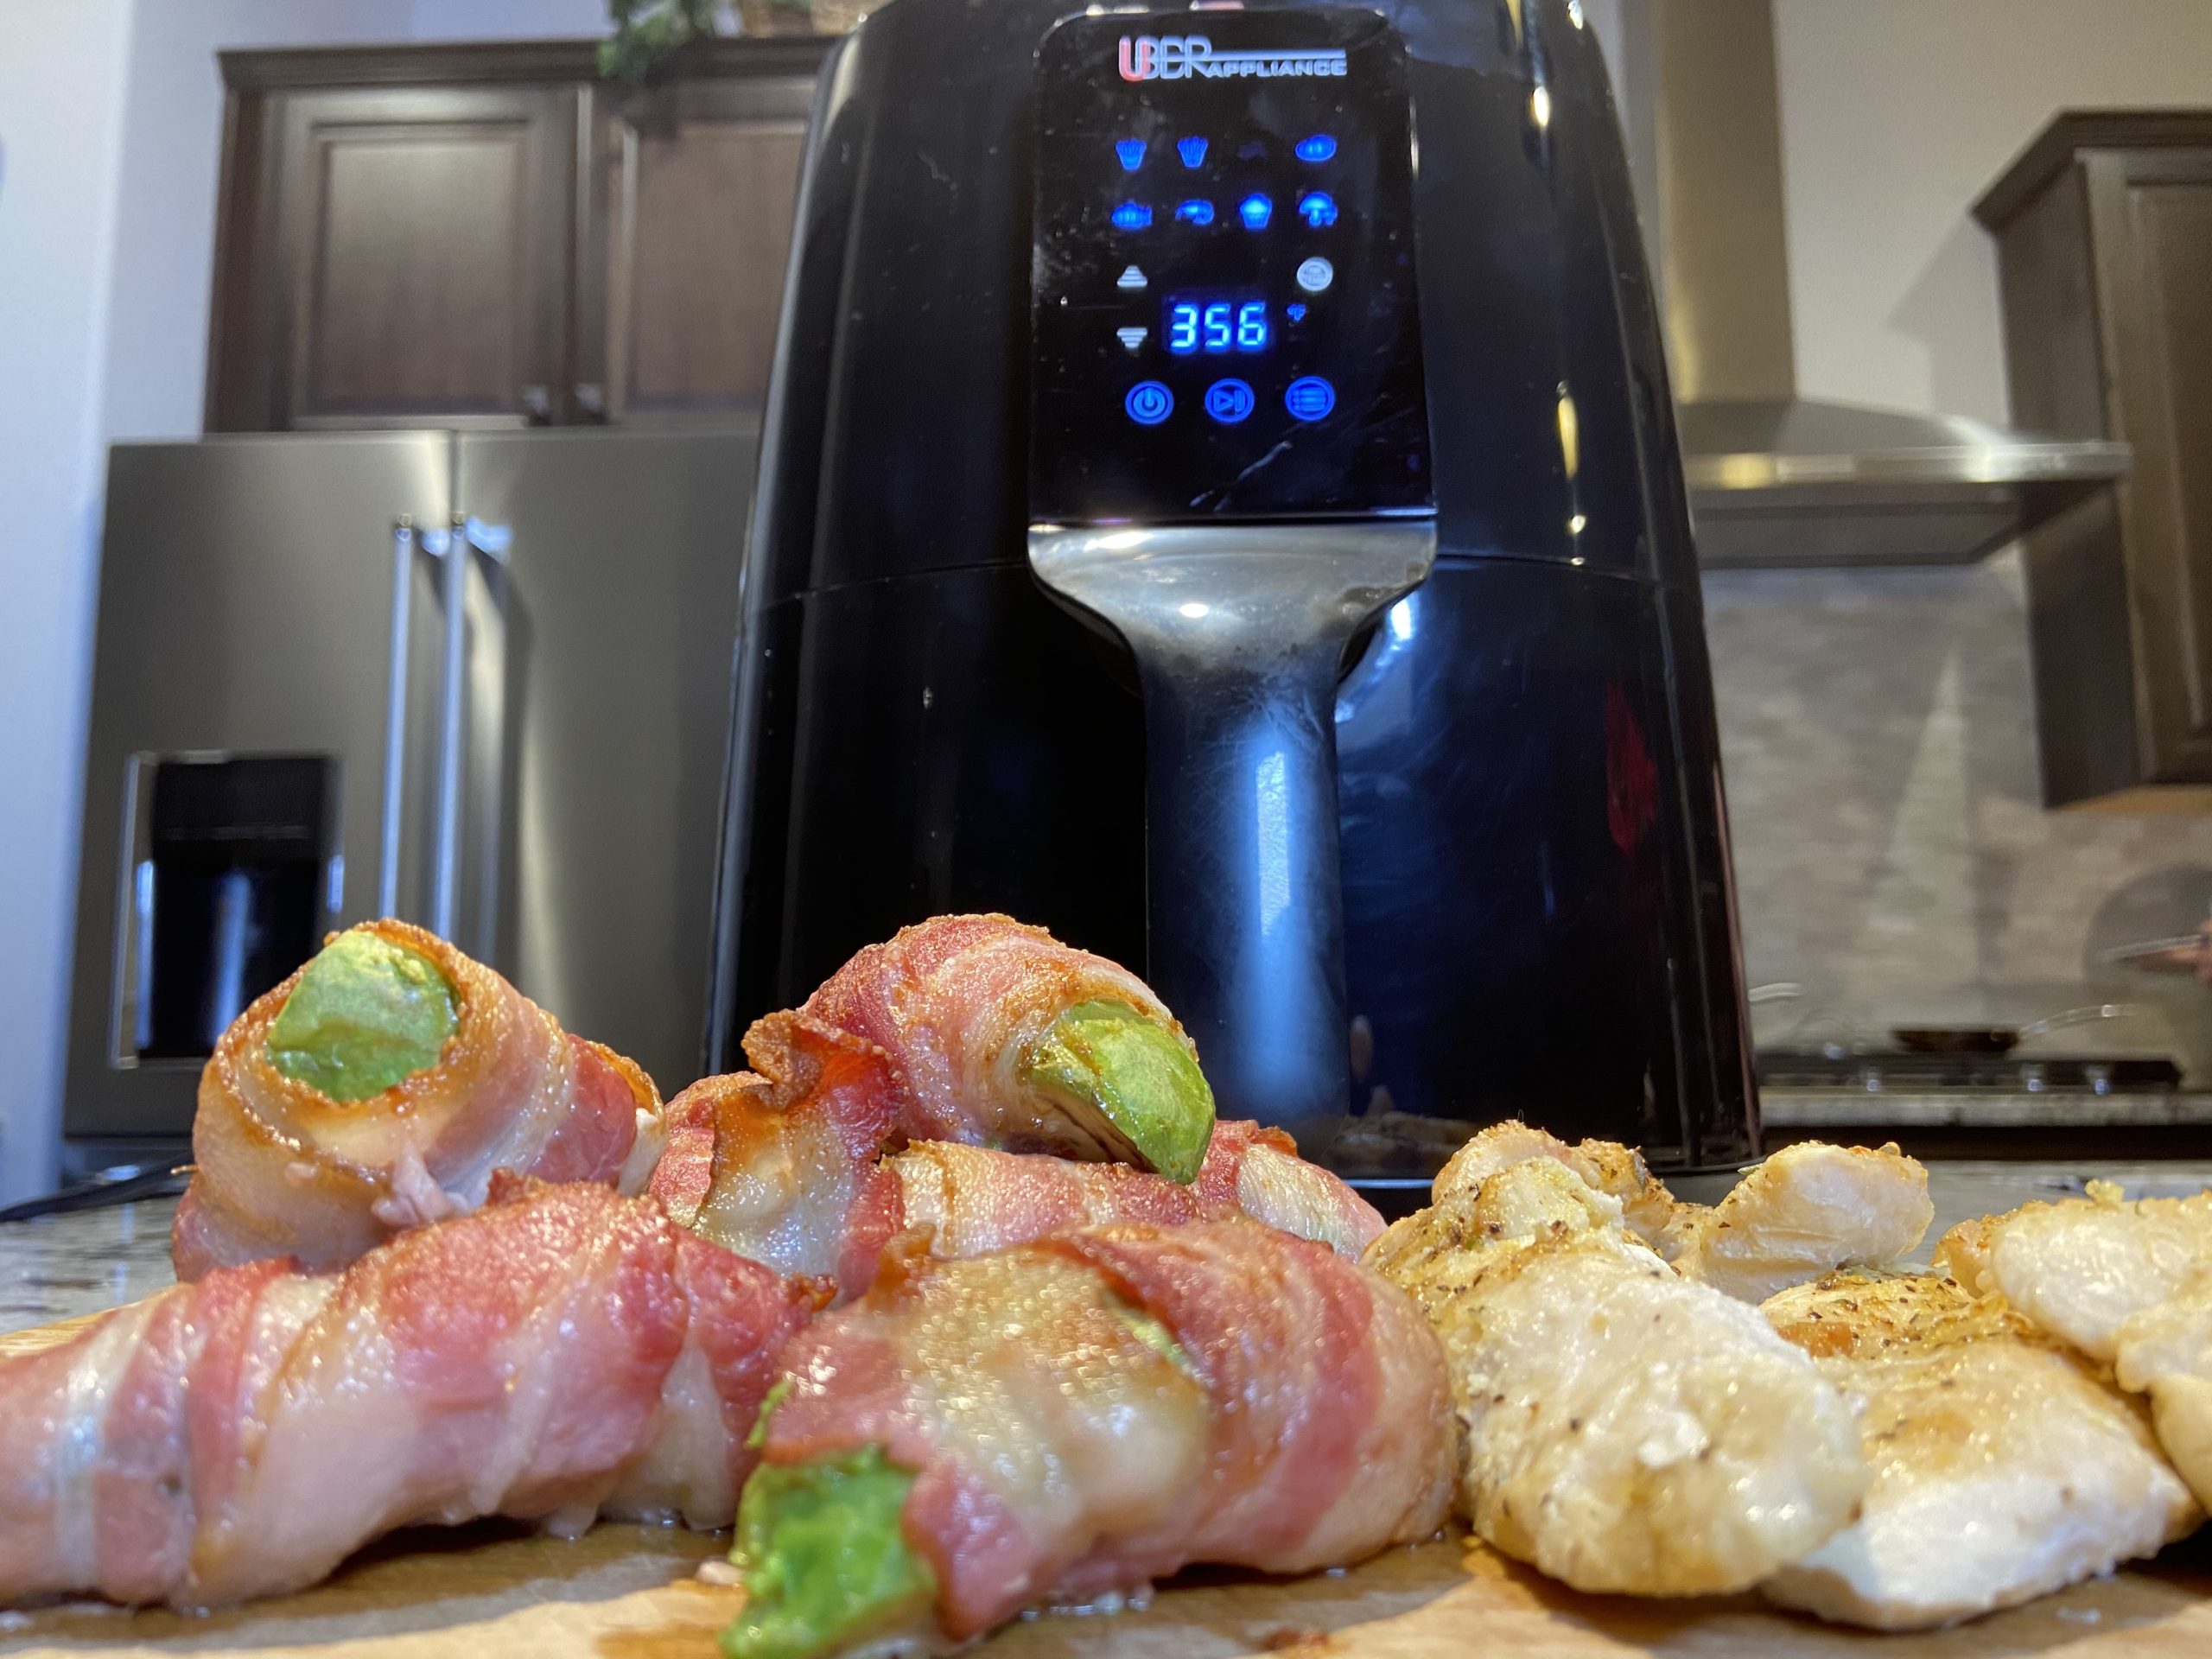 https://tailgating-challenge.com/wp-content/uploads/2021/01/Uber-appliance-air-fryer-review-scaled.jpeg